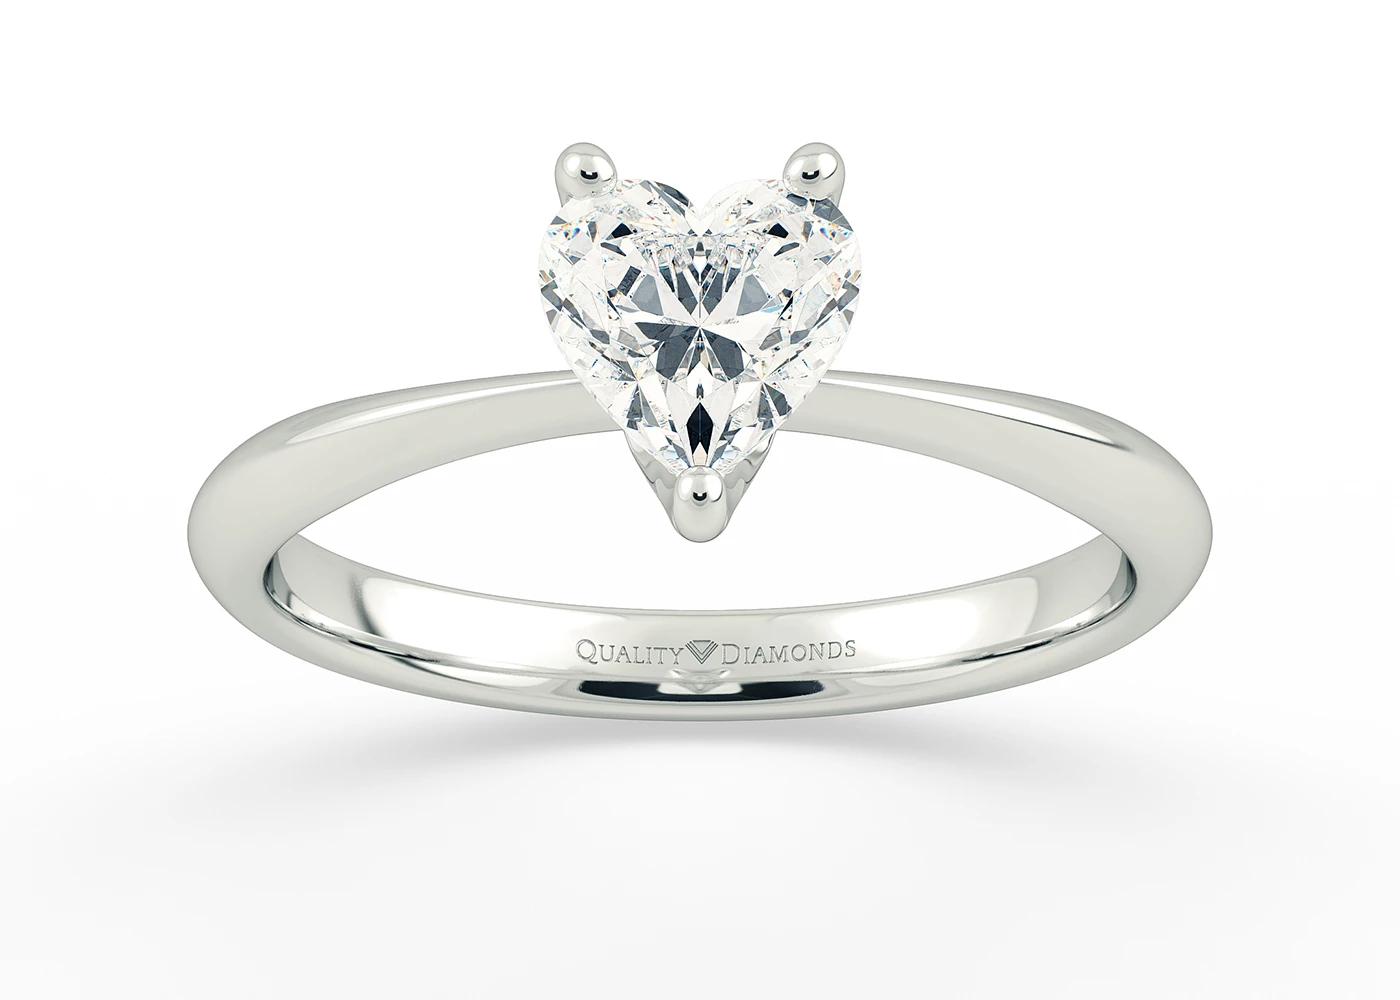 Two Carat Heart Solitaire Diamond Engagement Ring in 18K White Gold